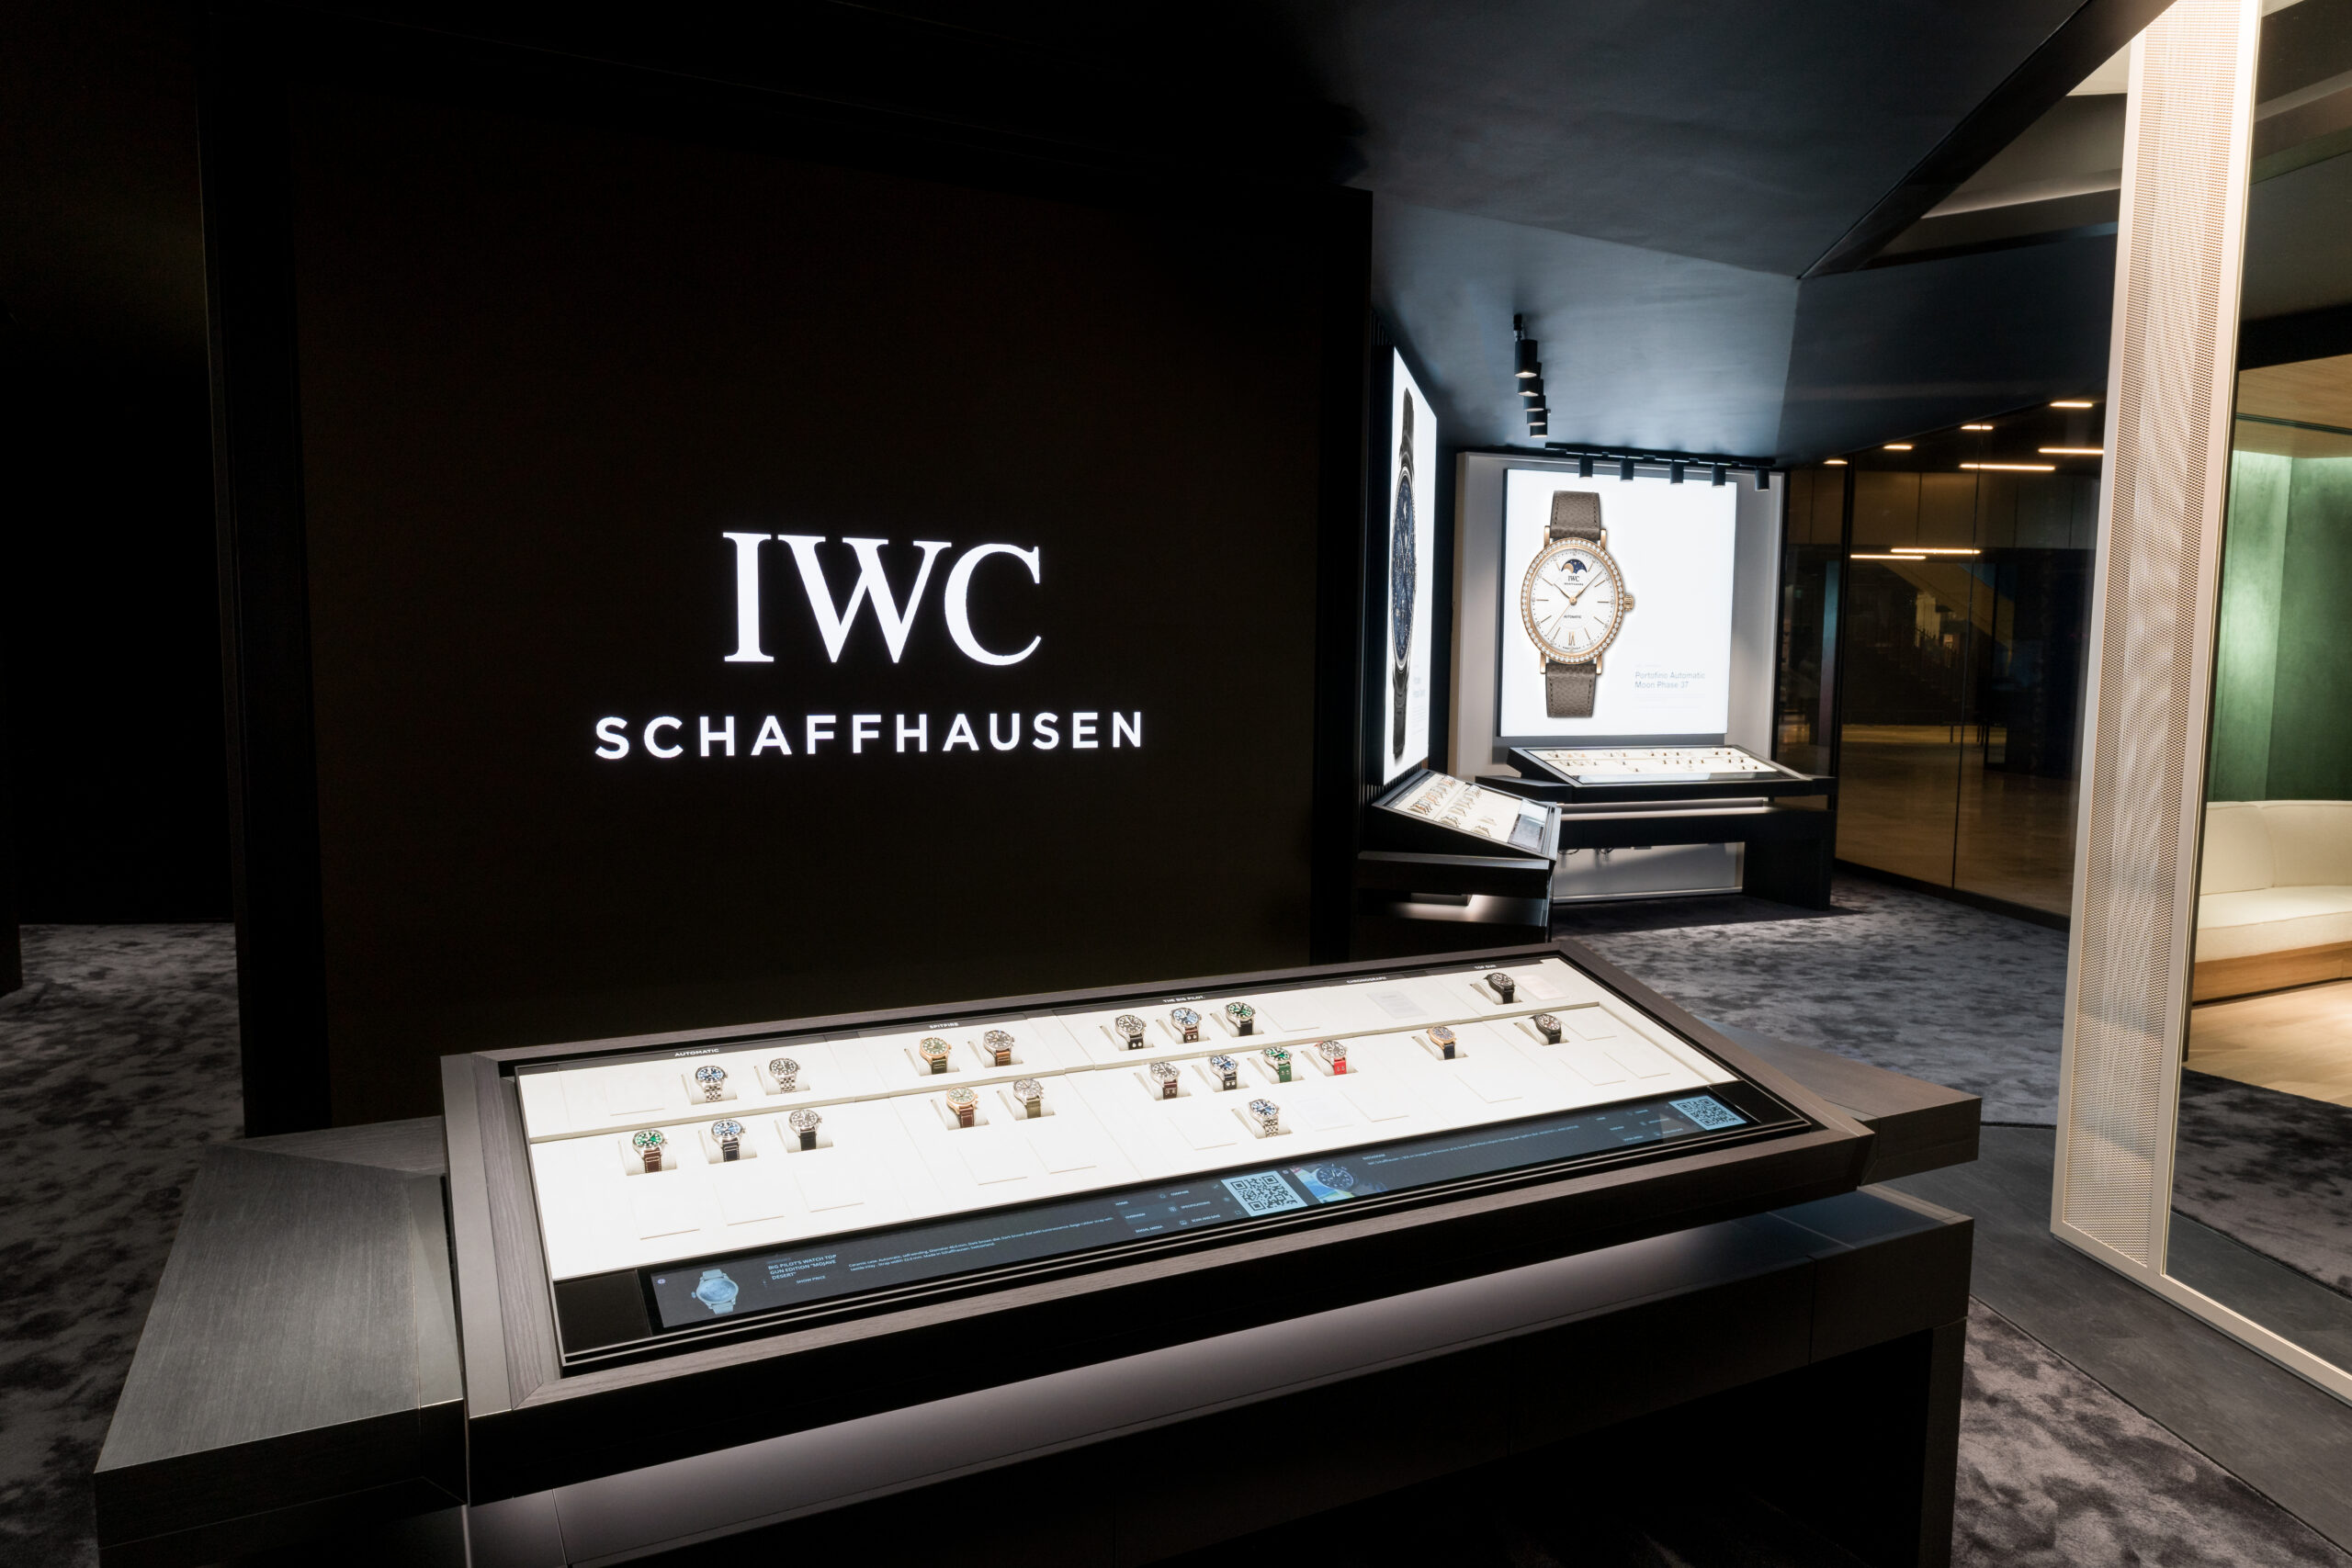 Iwc iwc boutique battersea 6 scaled